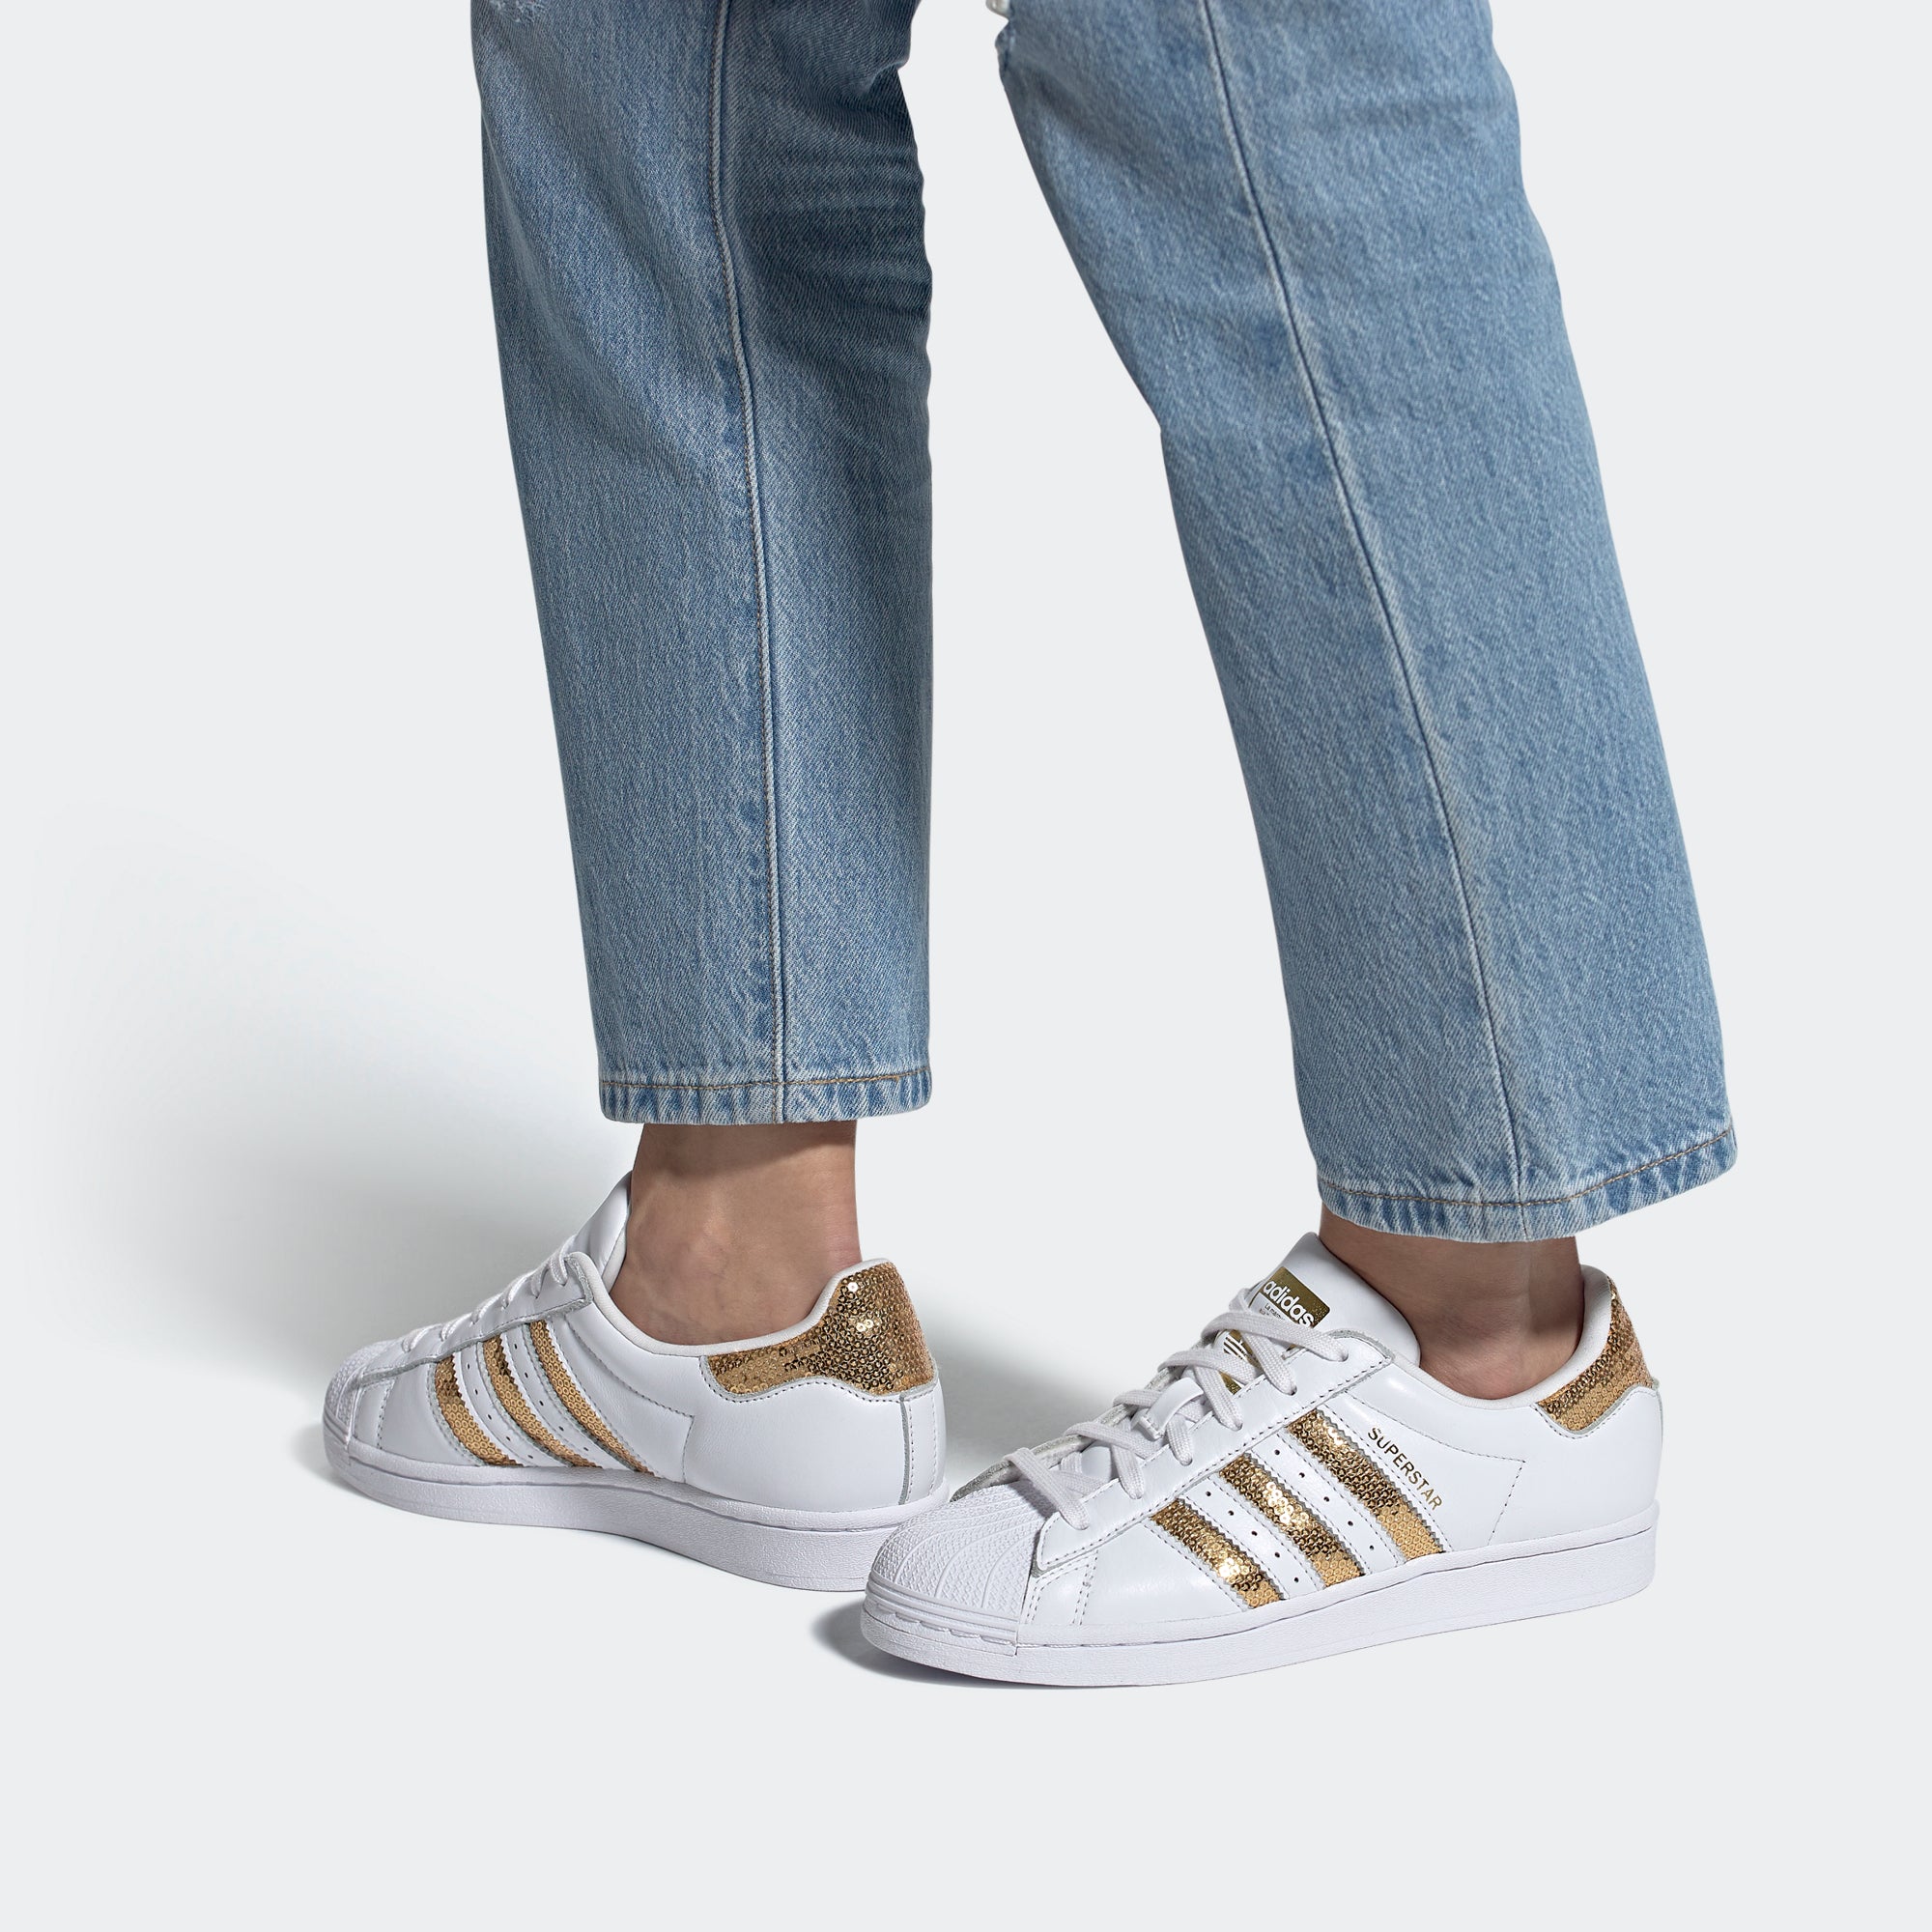 Women's adidas Superstar Shoes Gold G55658 Chicago Sports